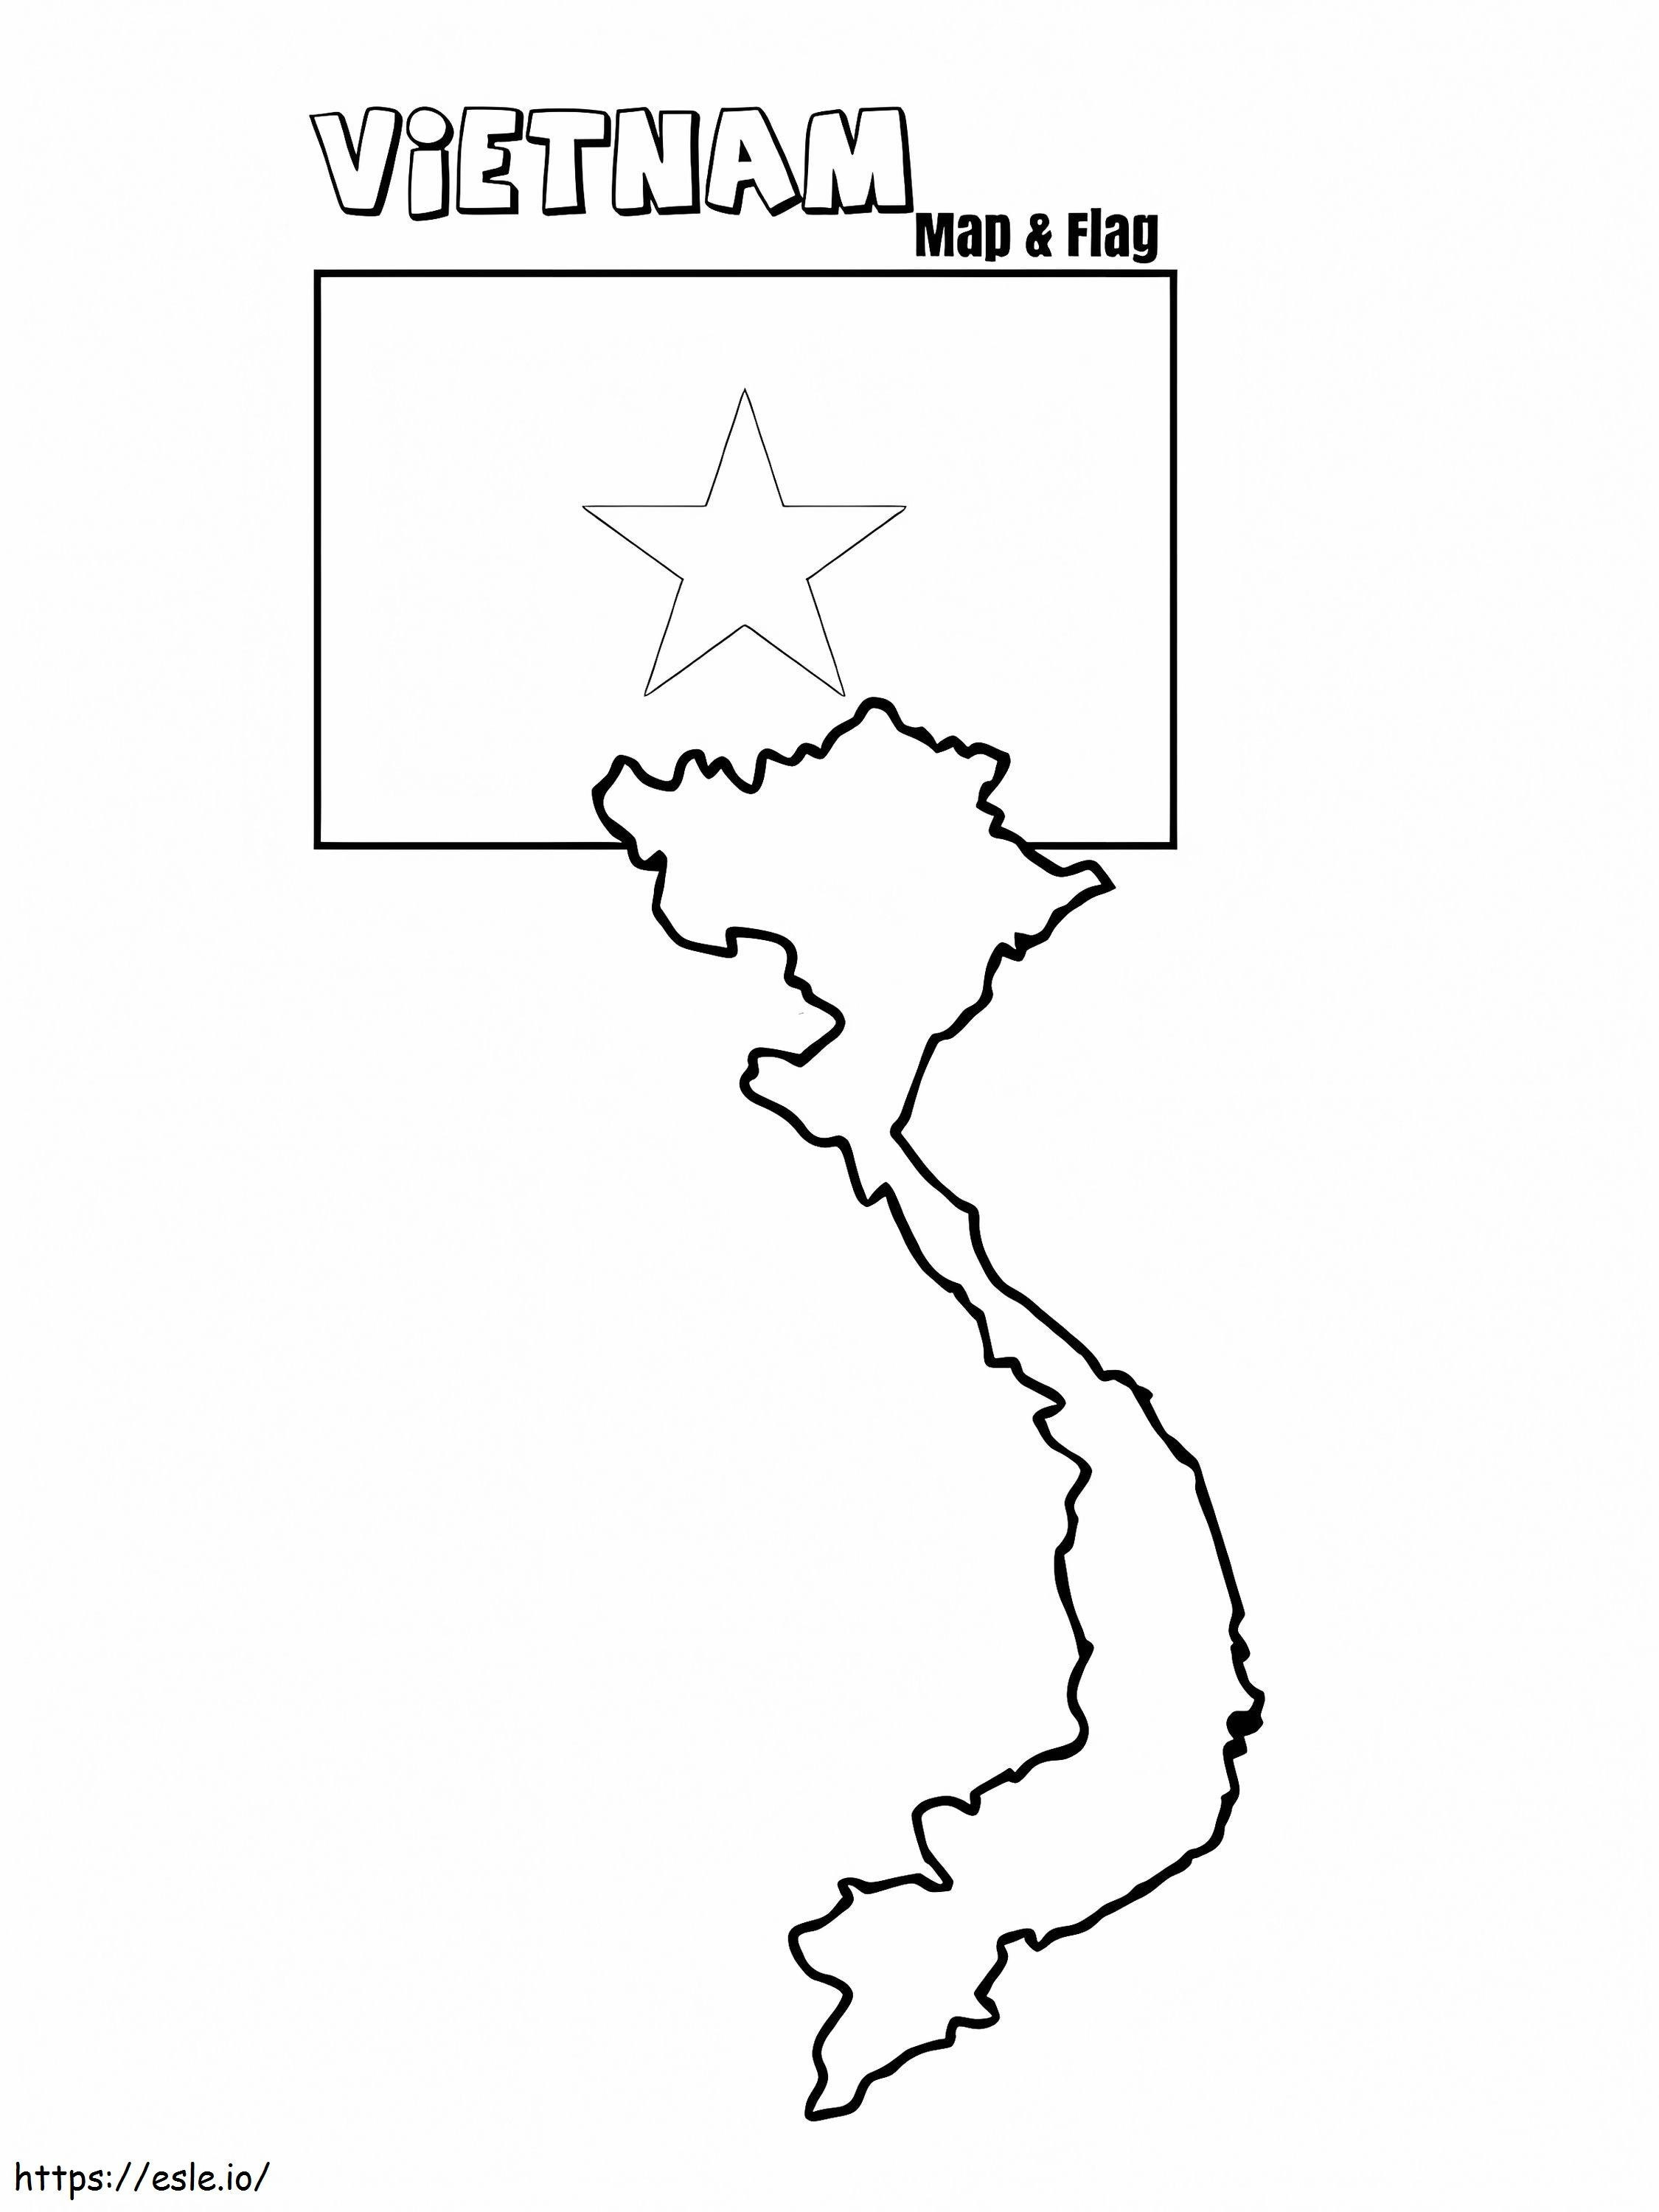 Vietnam Map And Flag coloring page